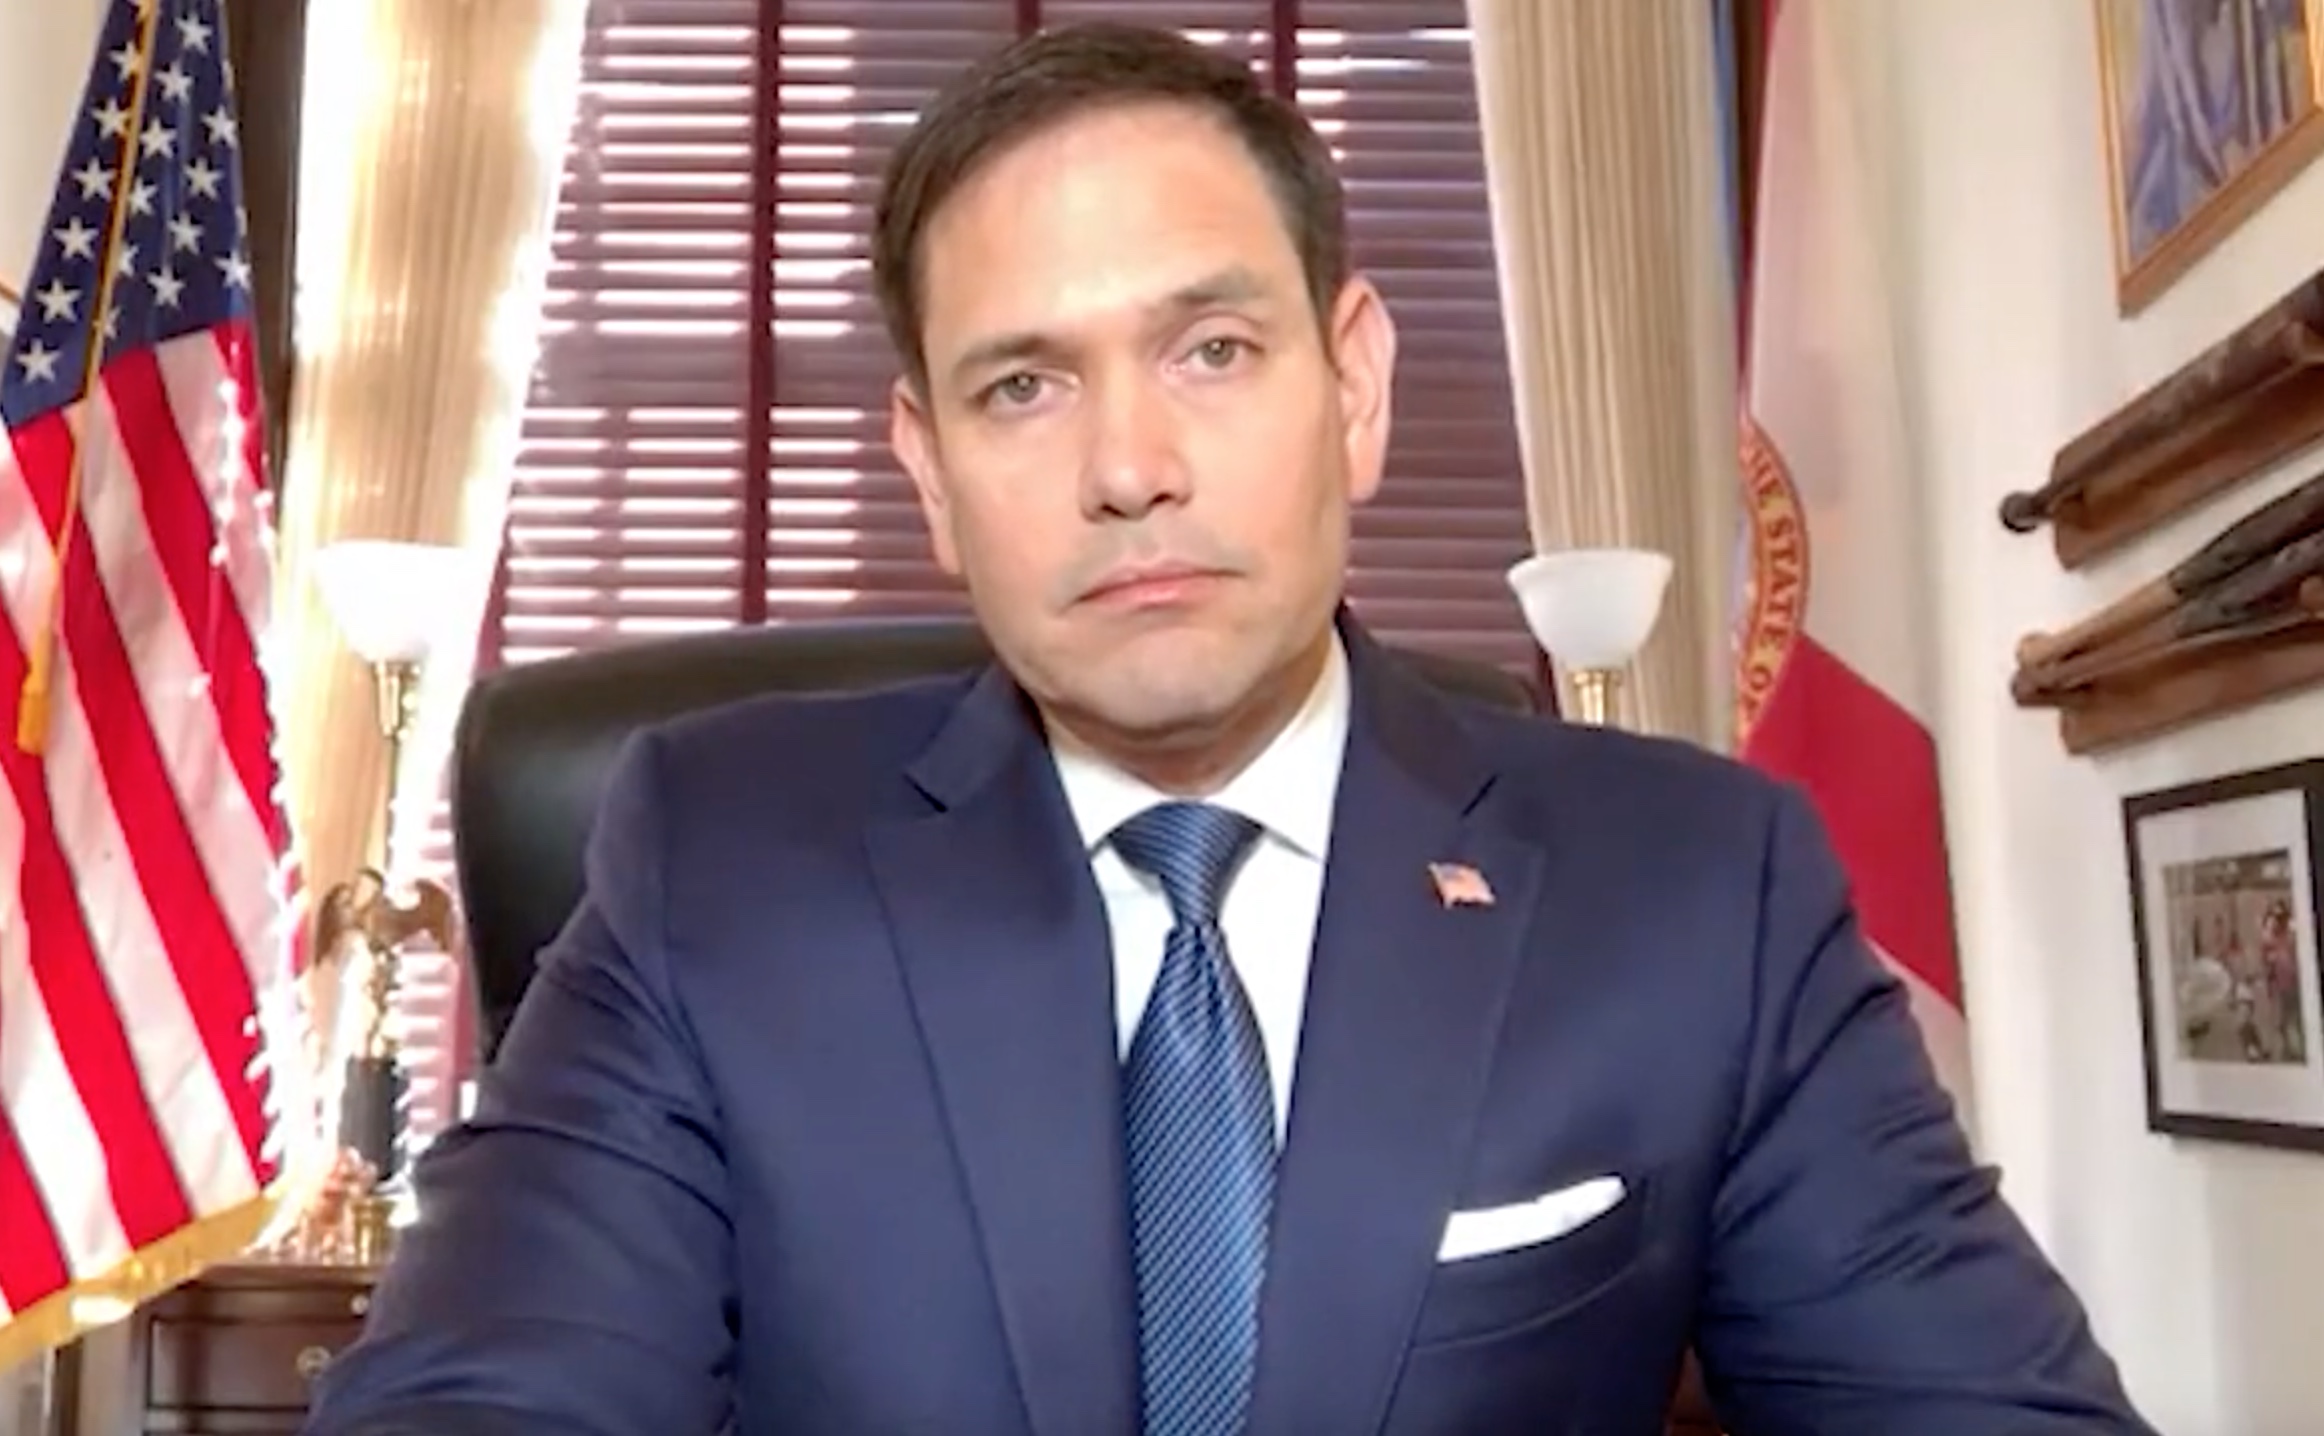 Rubio Blasted for Saying He Can't Attend State of the Union